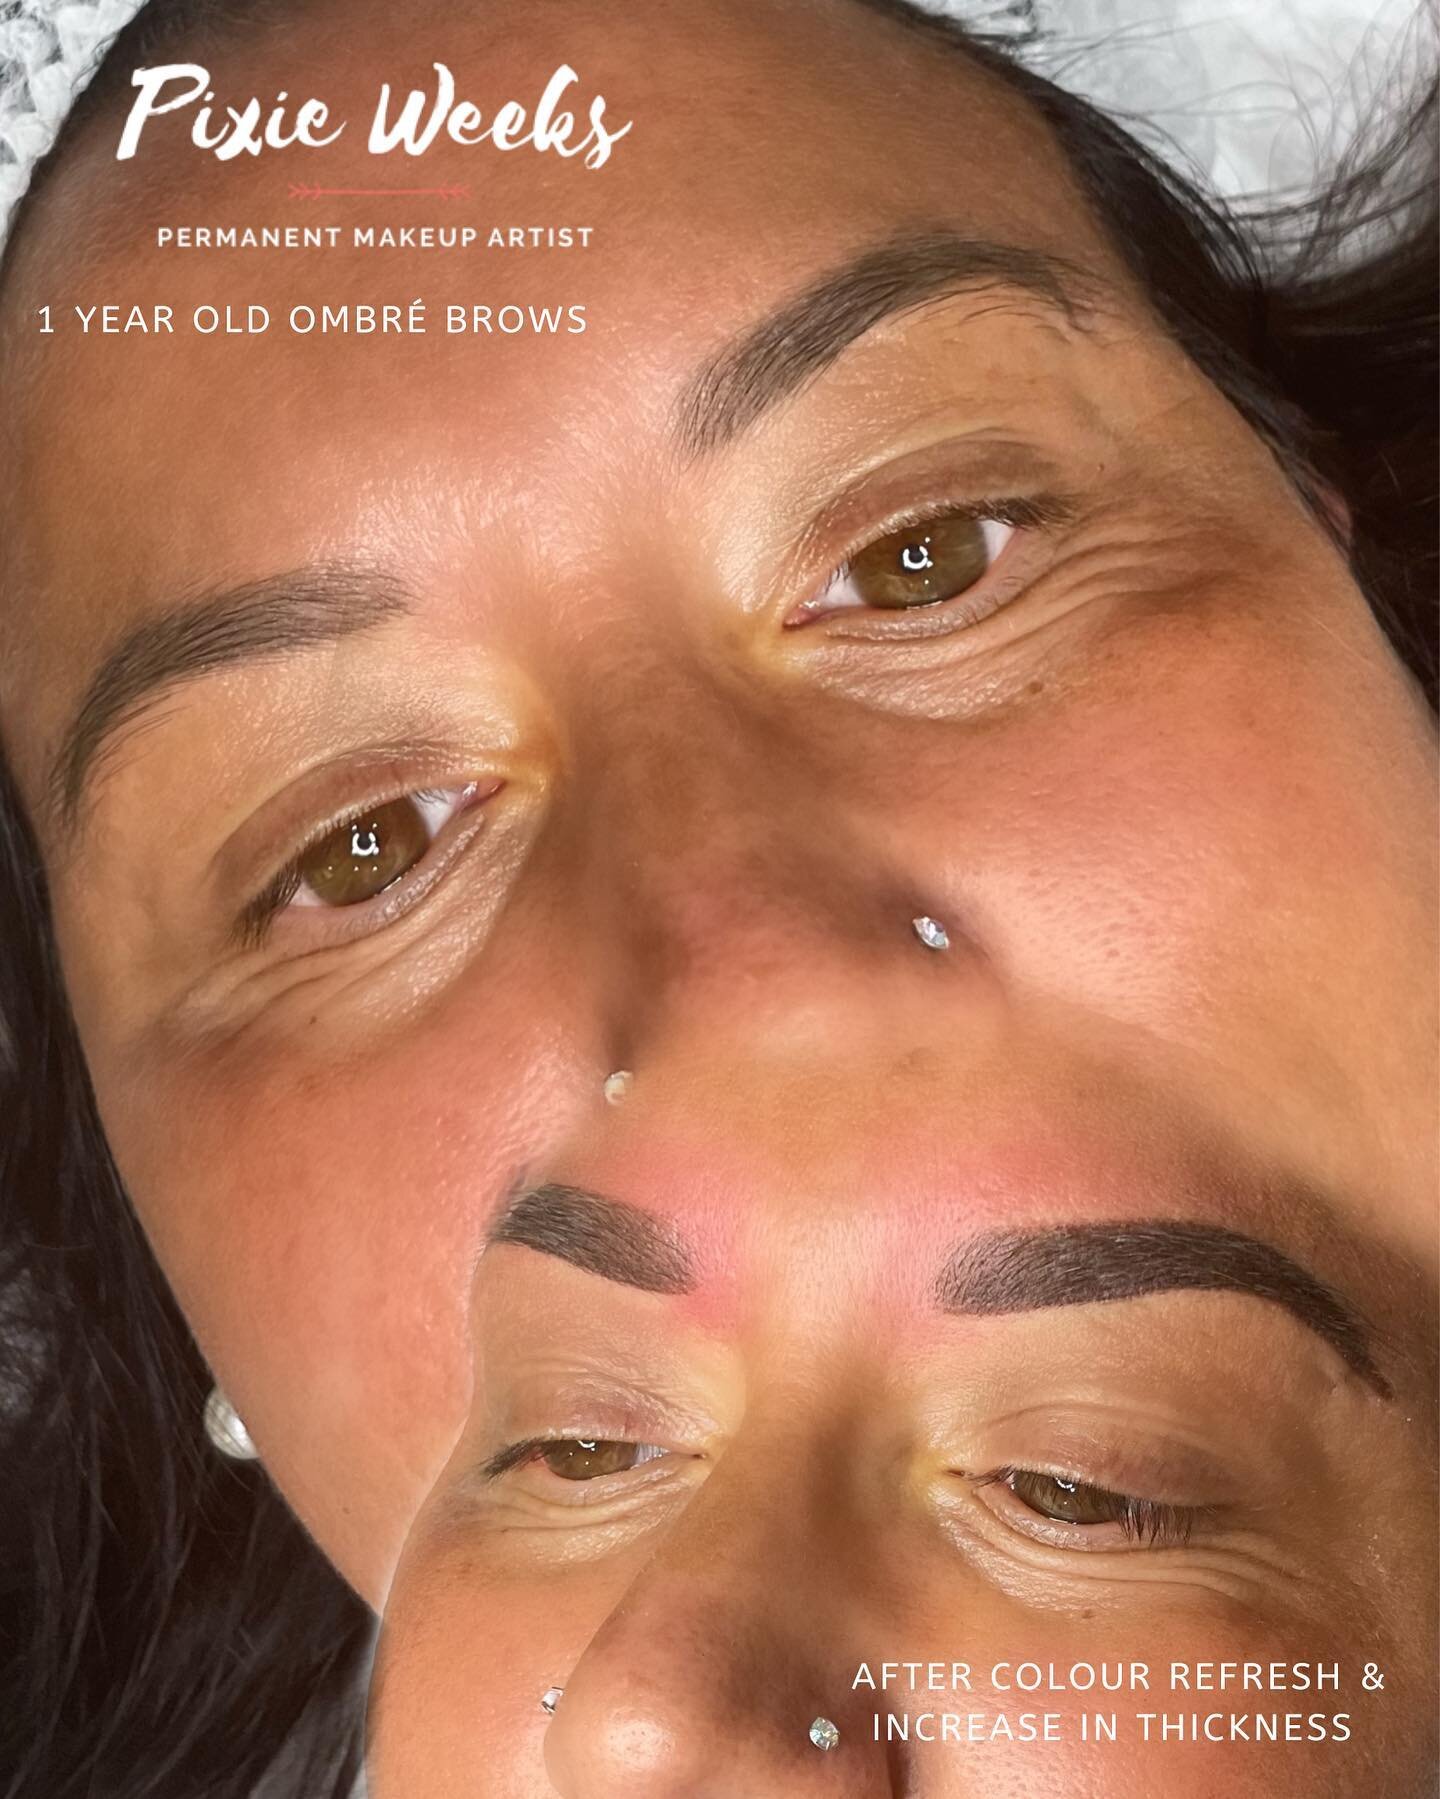 These brows still looked amazing at over a year old! 🤩 But my client wanted a little freshen up in colour and to increase the thickness a little, so it was time for a Colour Boost!

We&rsquo;d discussed thickness at her 6 week follow up appointment 